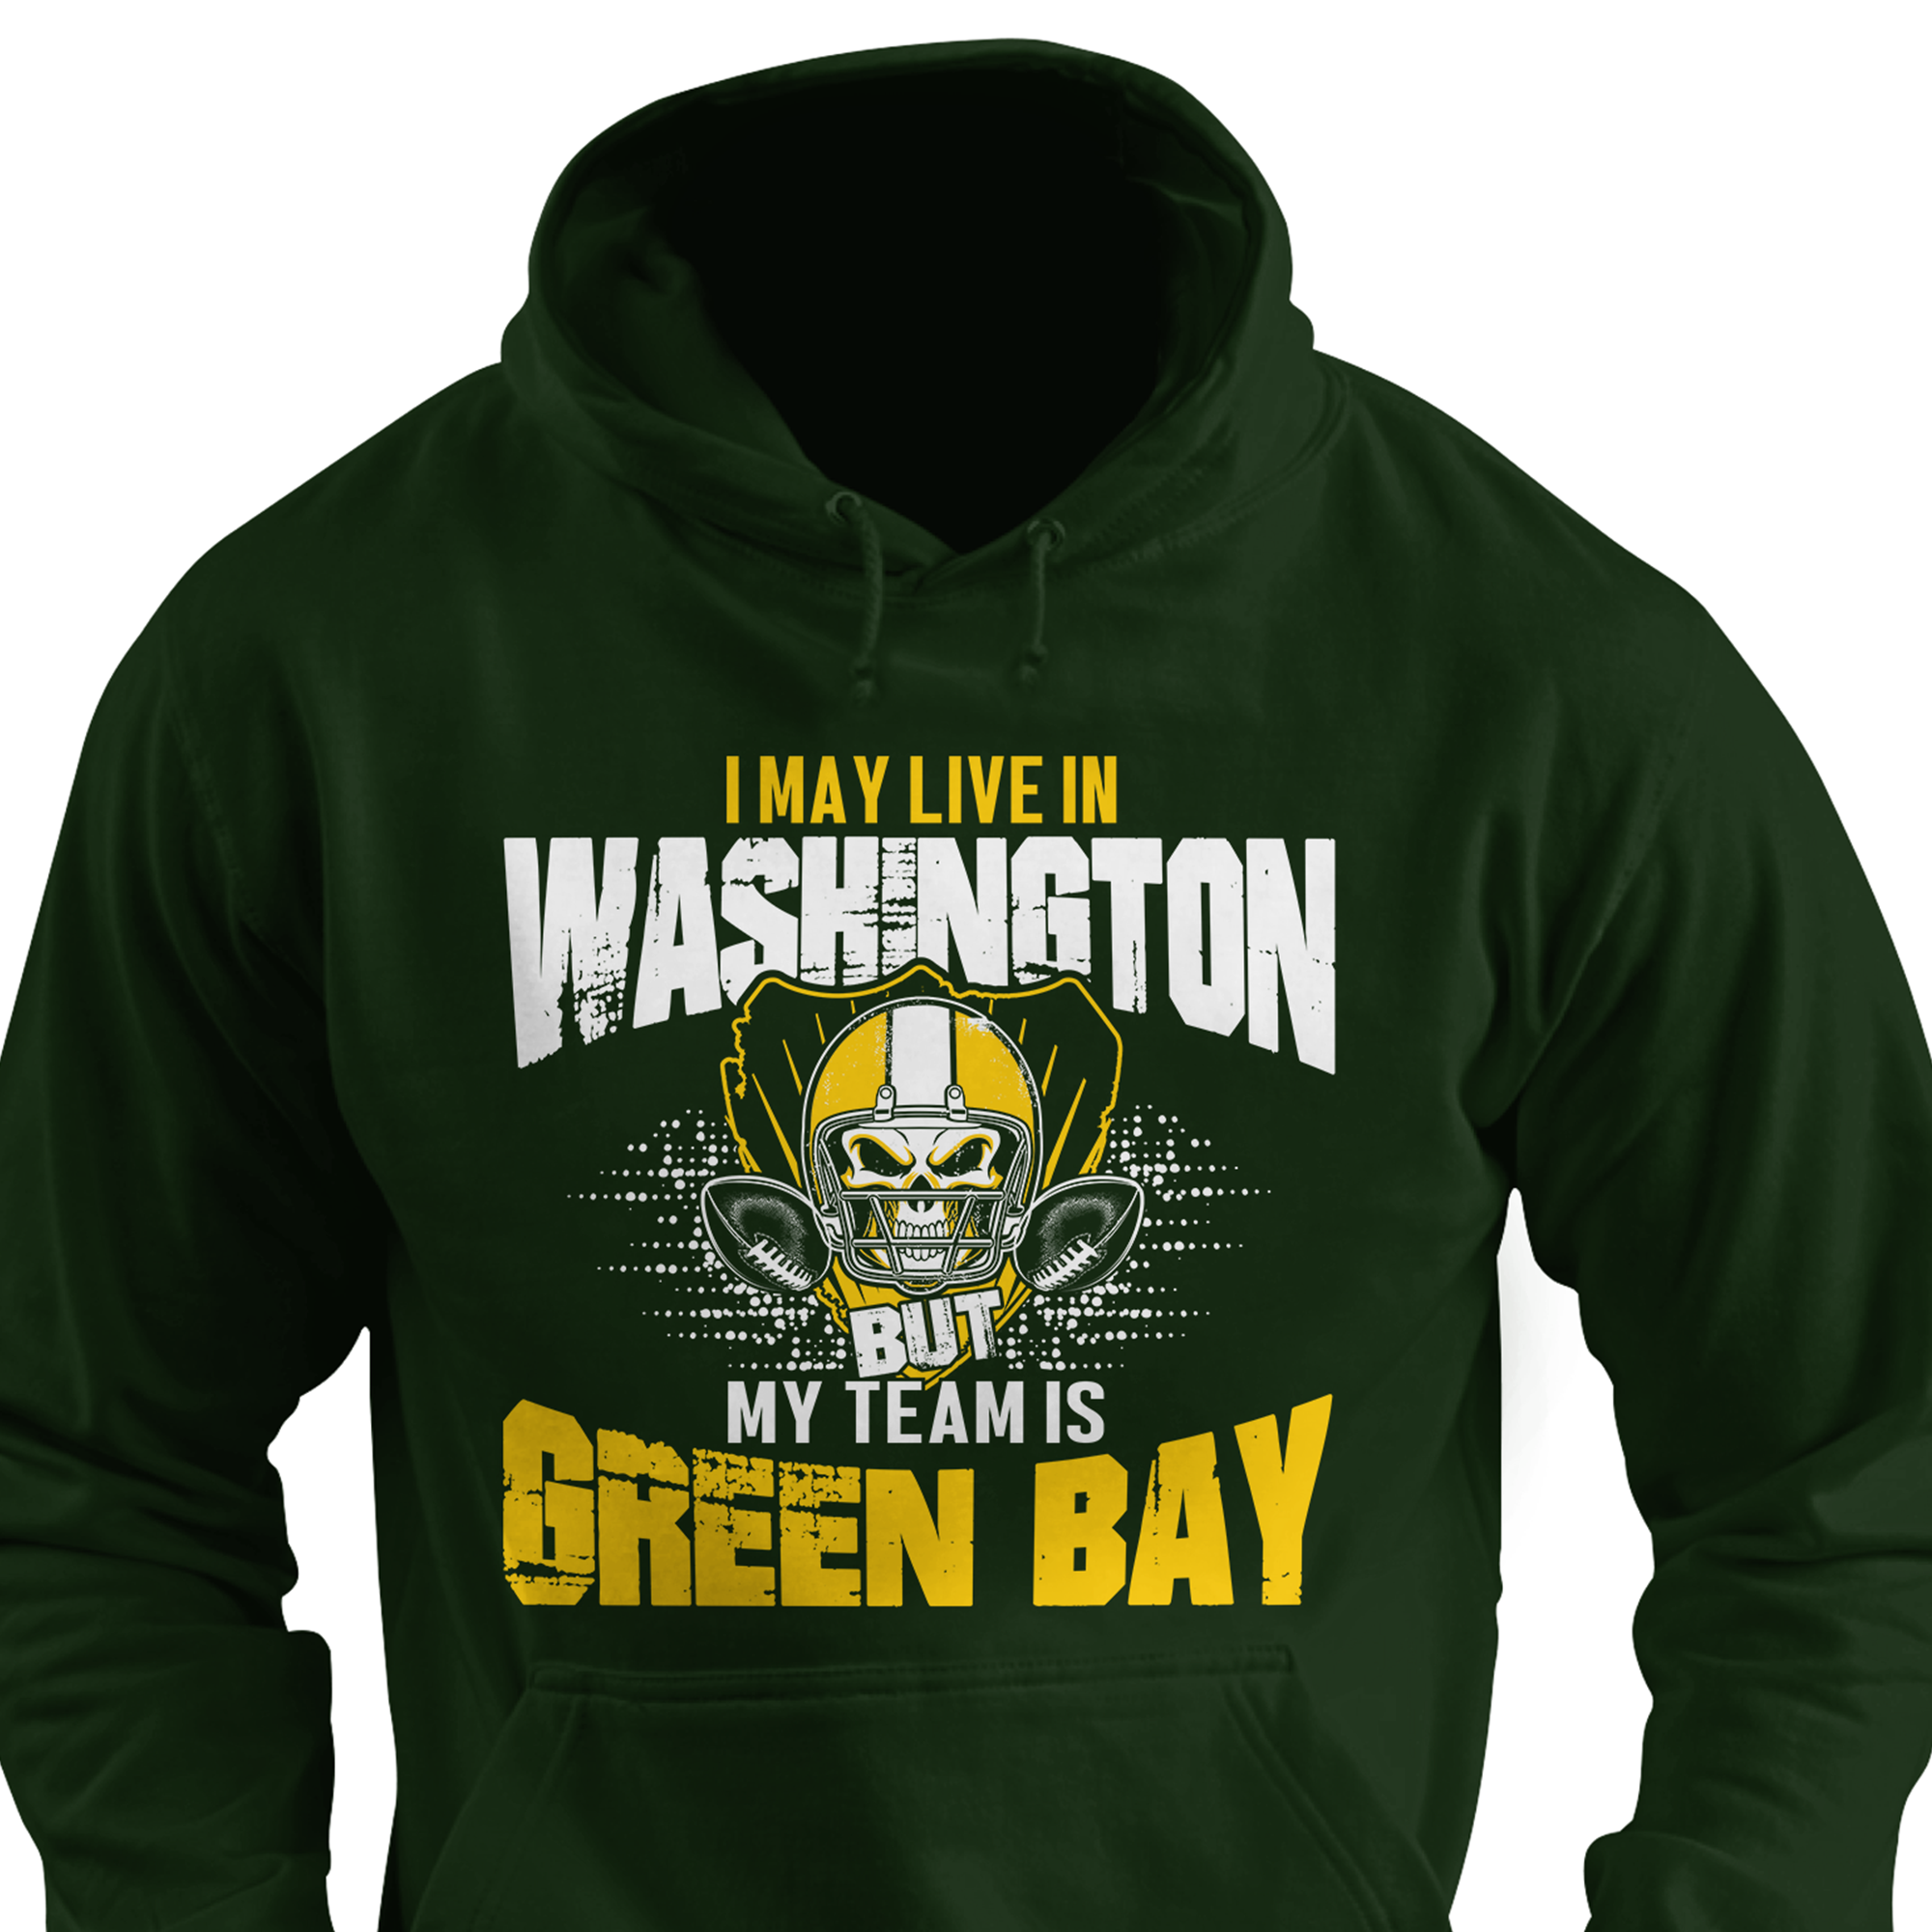 I May Live in Washington but My Team is Green Bay